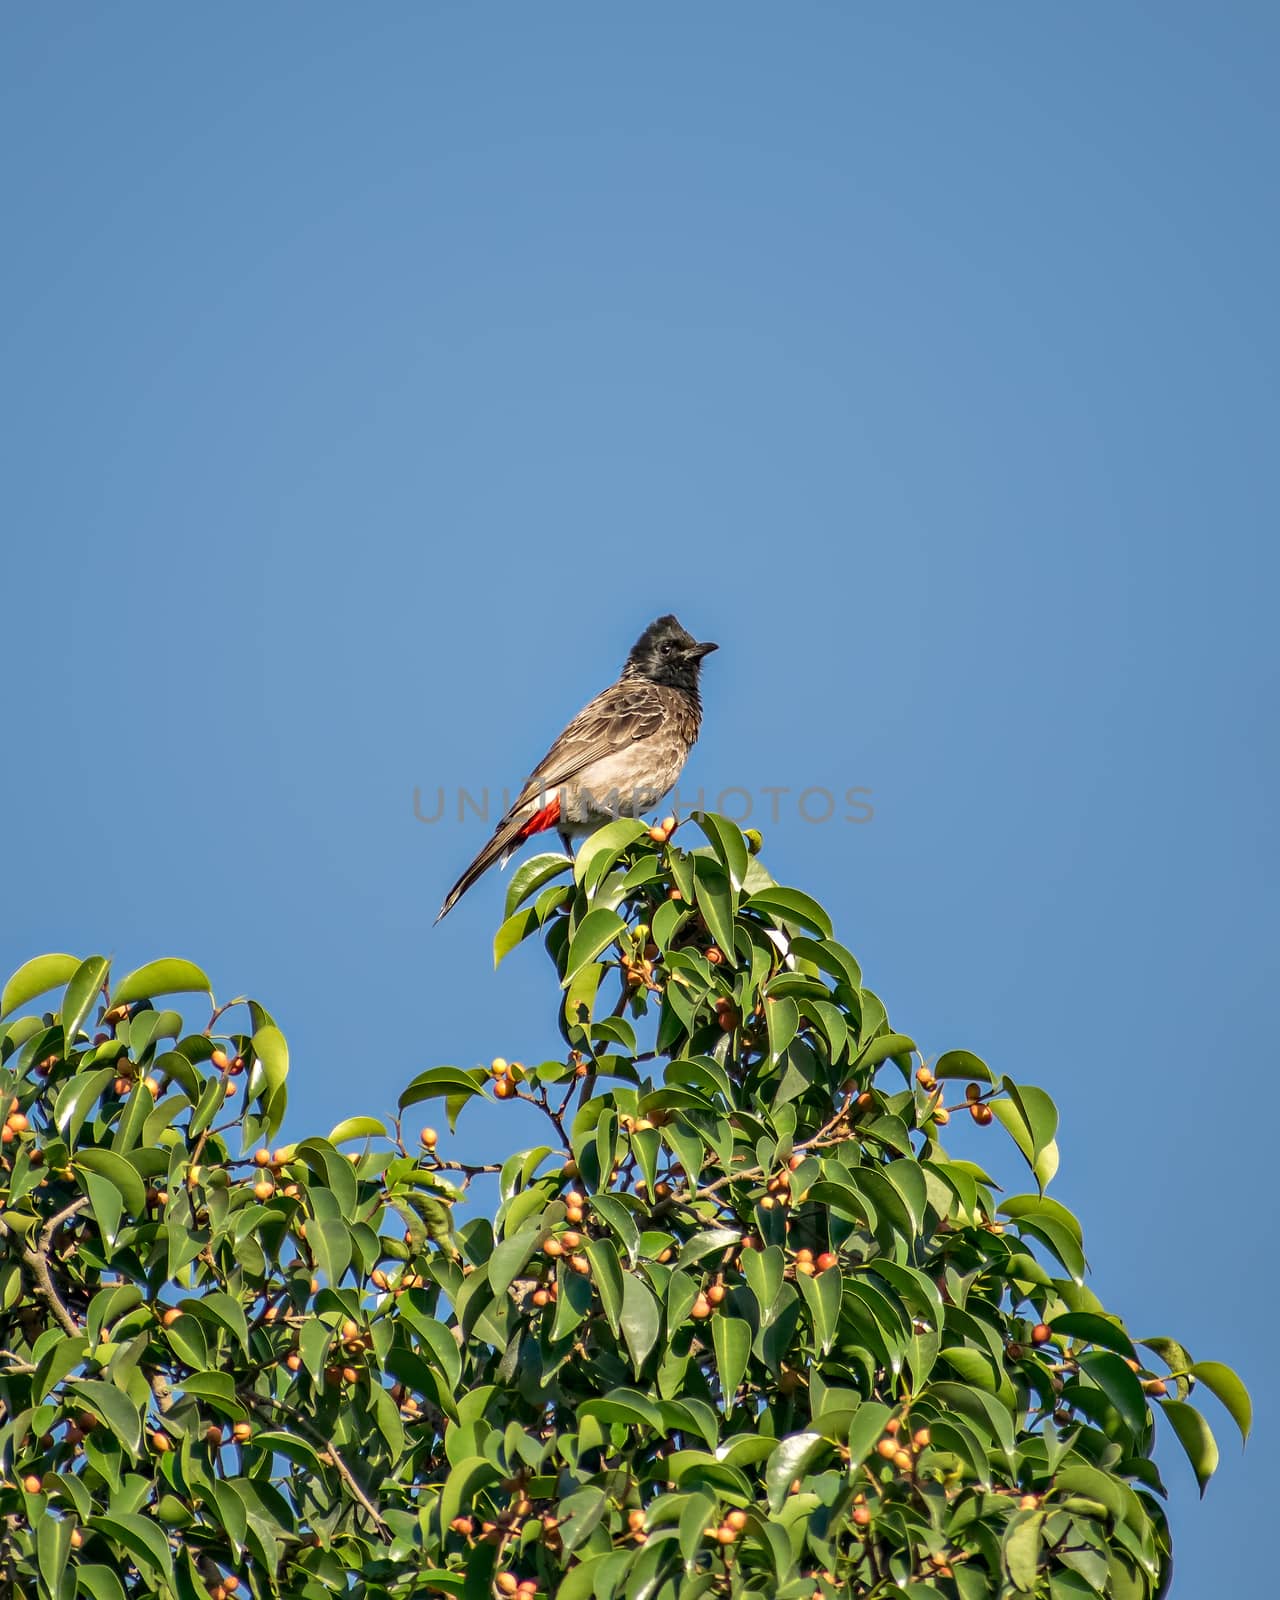 Red vented bulbul sitting on green tree leaves with clear blue sky background.